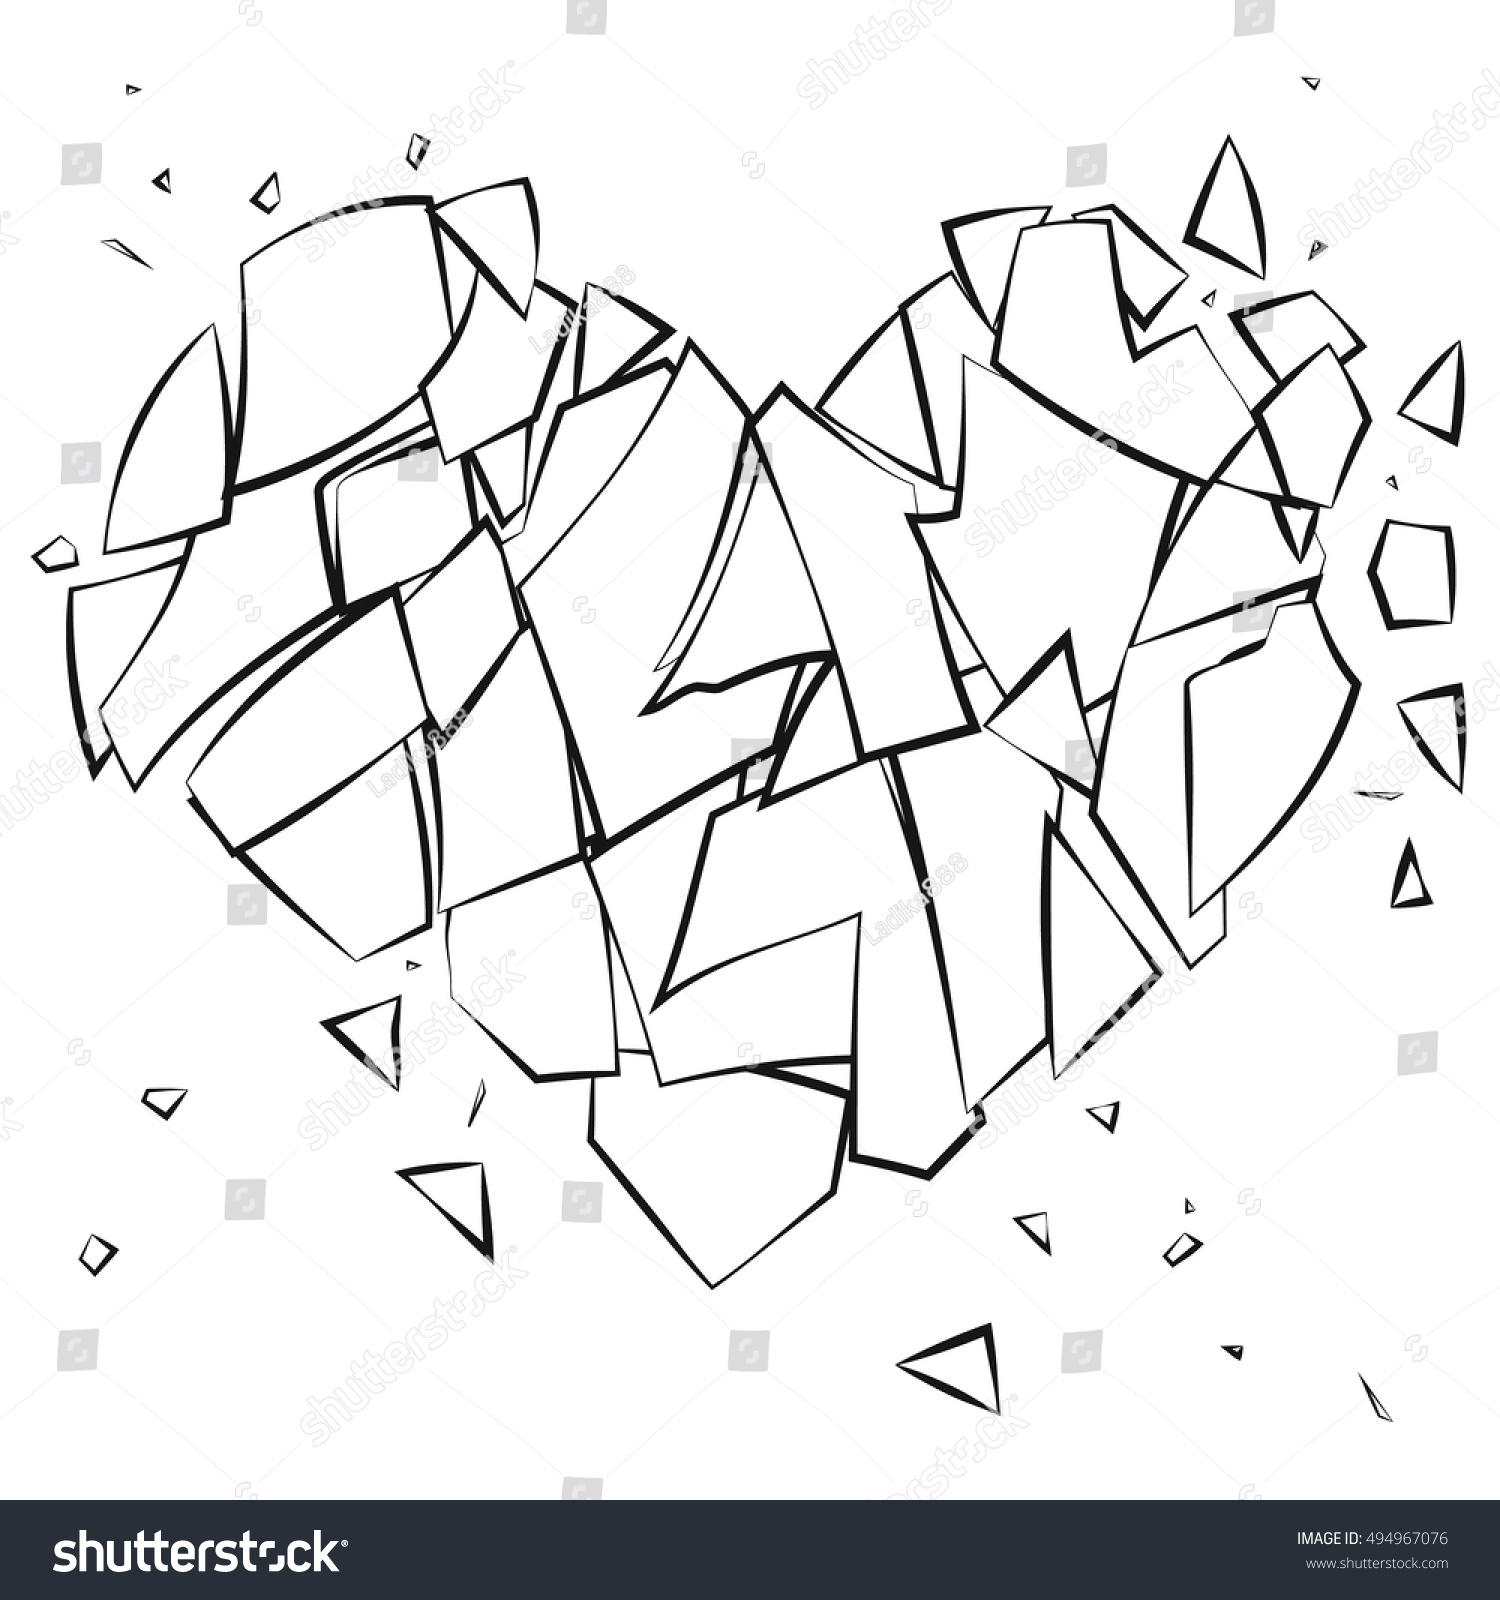 Coloring page broken heart on white stock vector royalty free